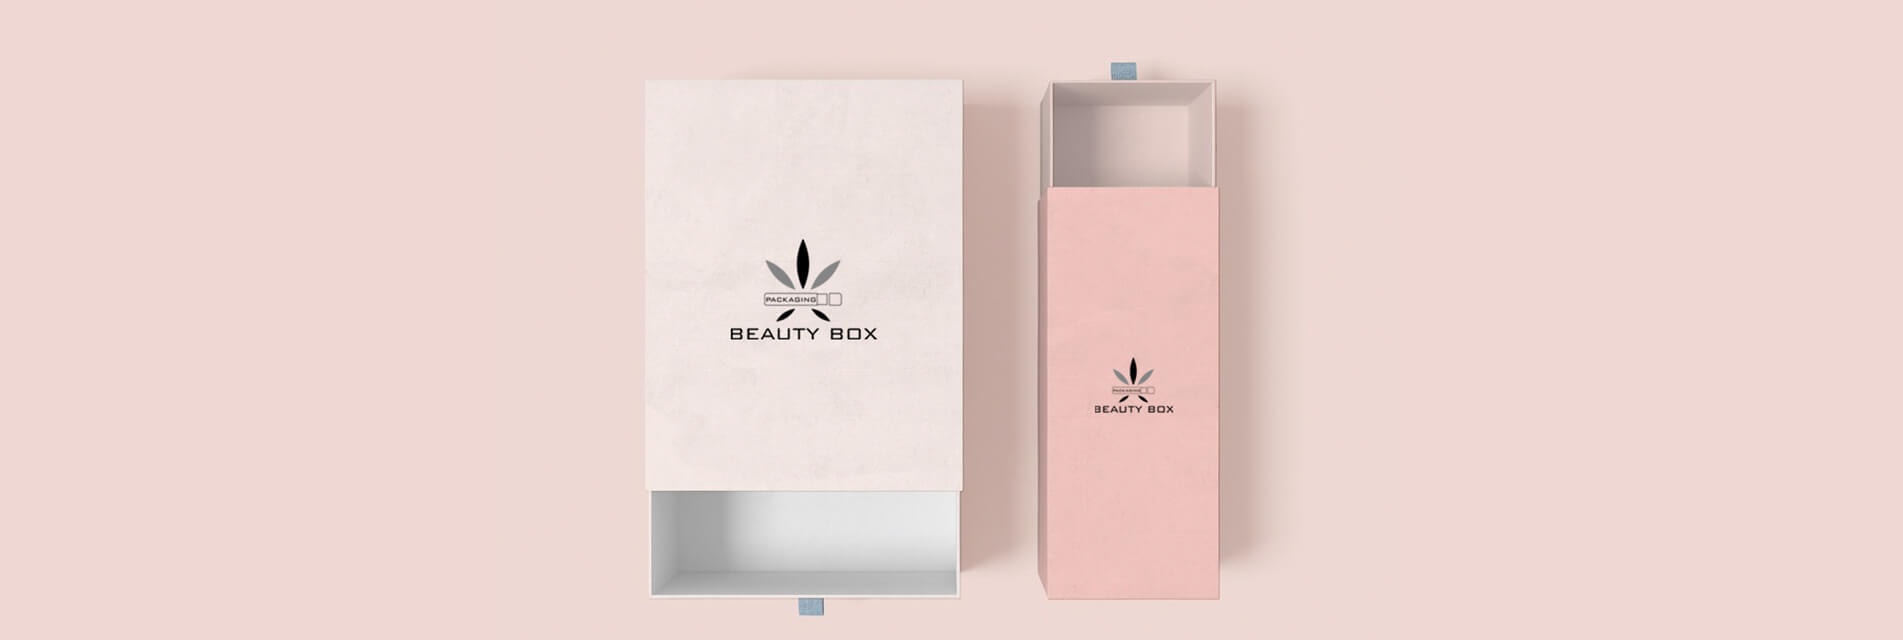 chinese-packaging-manufacturer-specializing-in-cosmetic-and-beauty-packaging